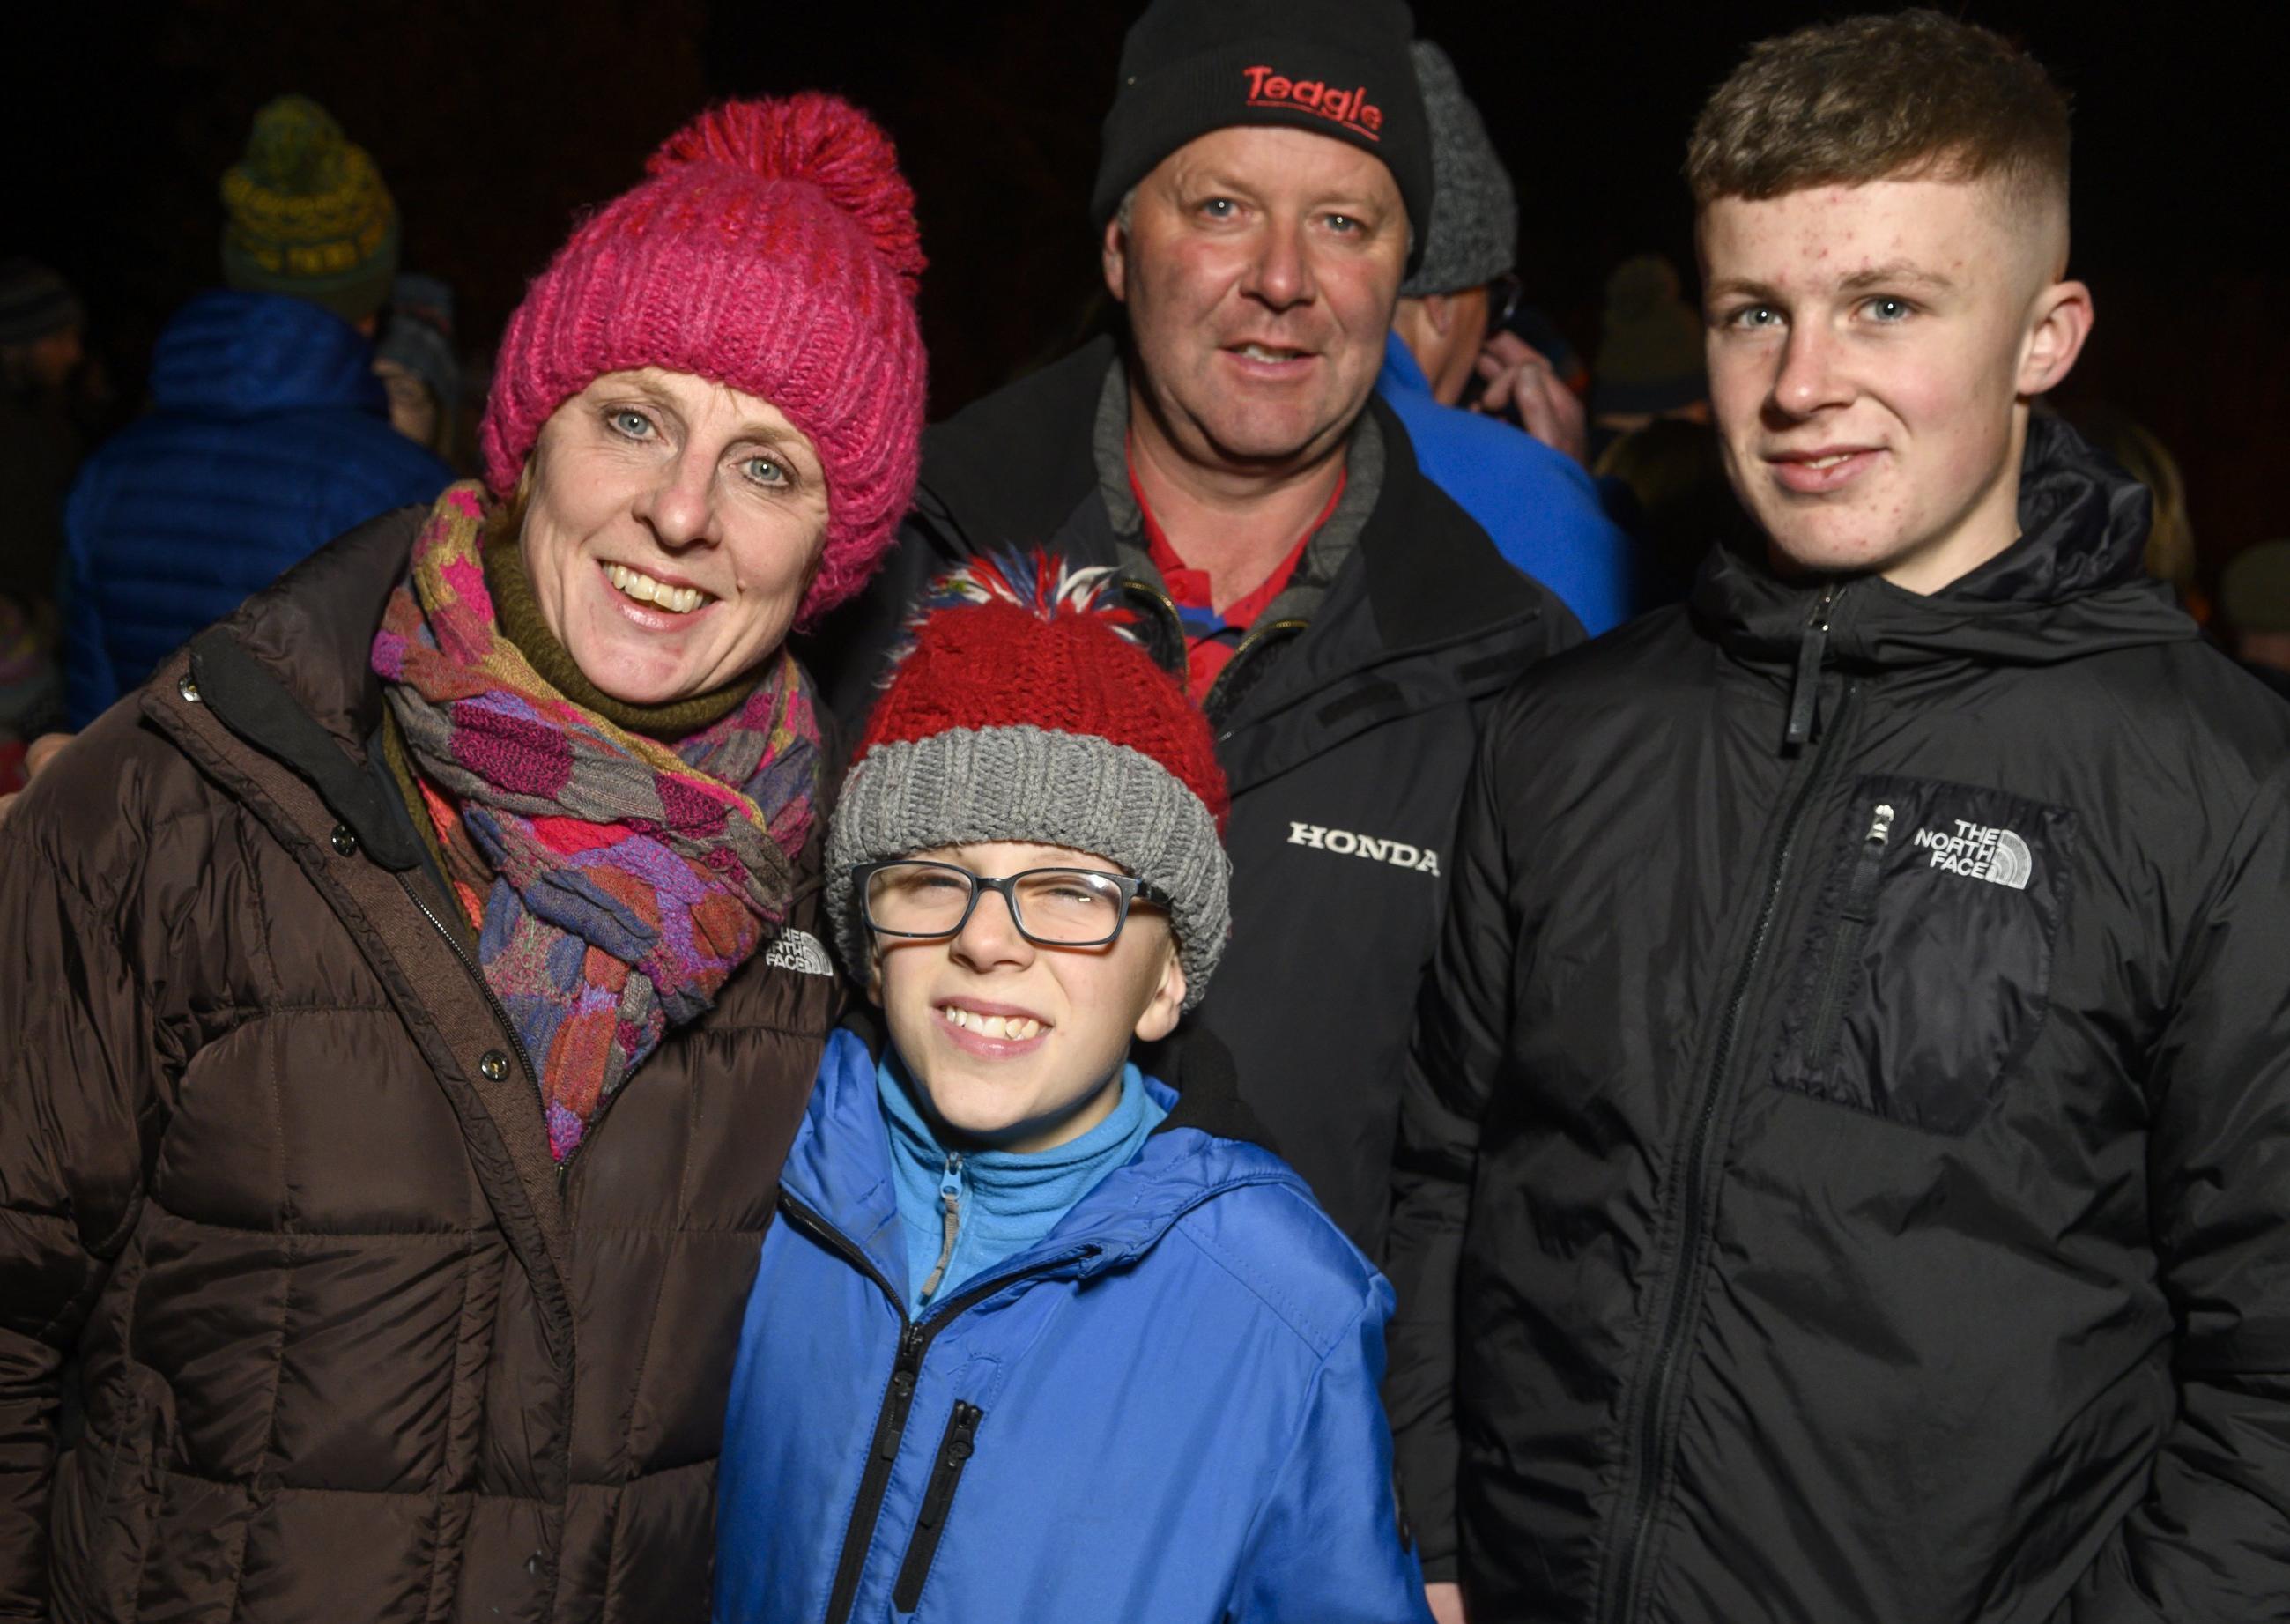 Lauder fireworks display 2019

Elain and Keith Robertson with children Sam and Csmeron

Pic Phil Wilkinson 
info@philspix.com